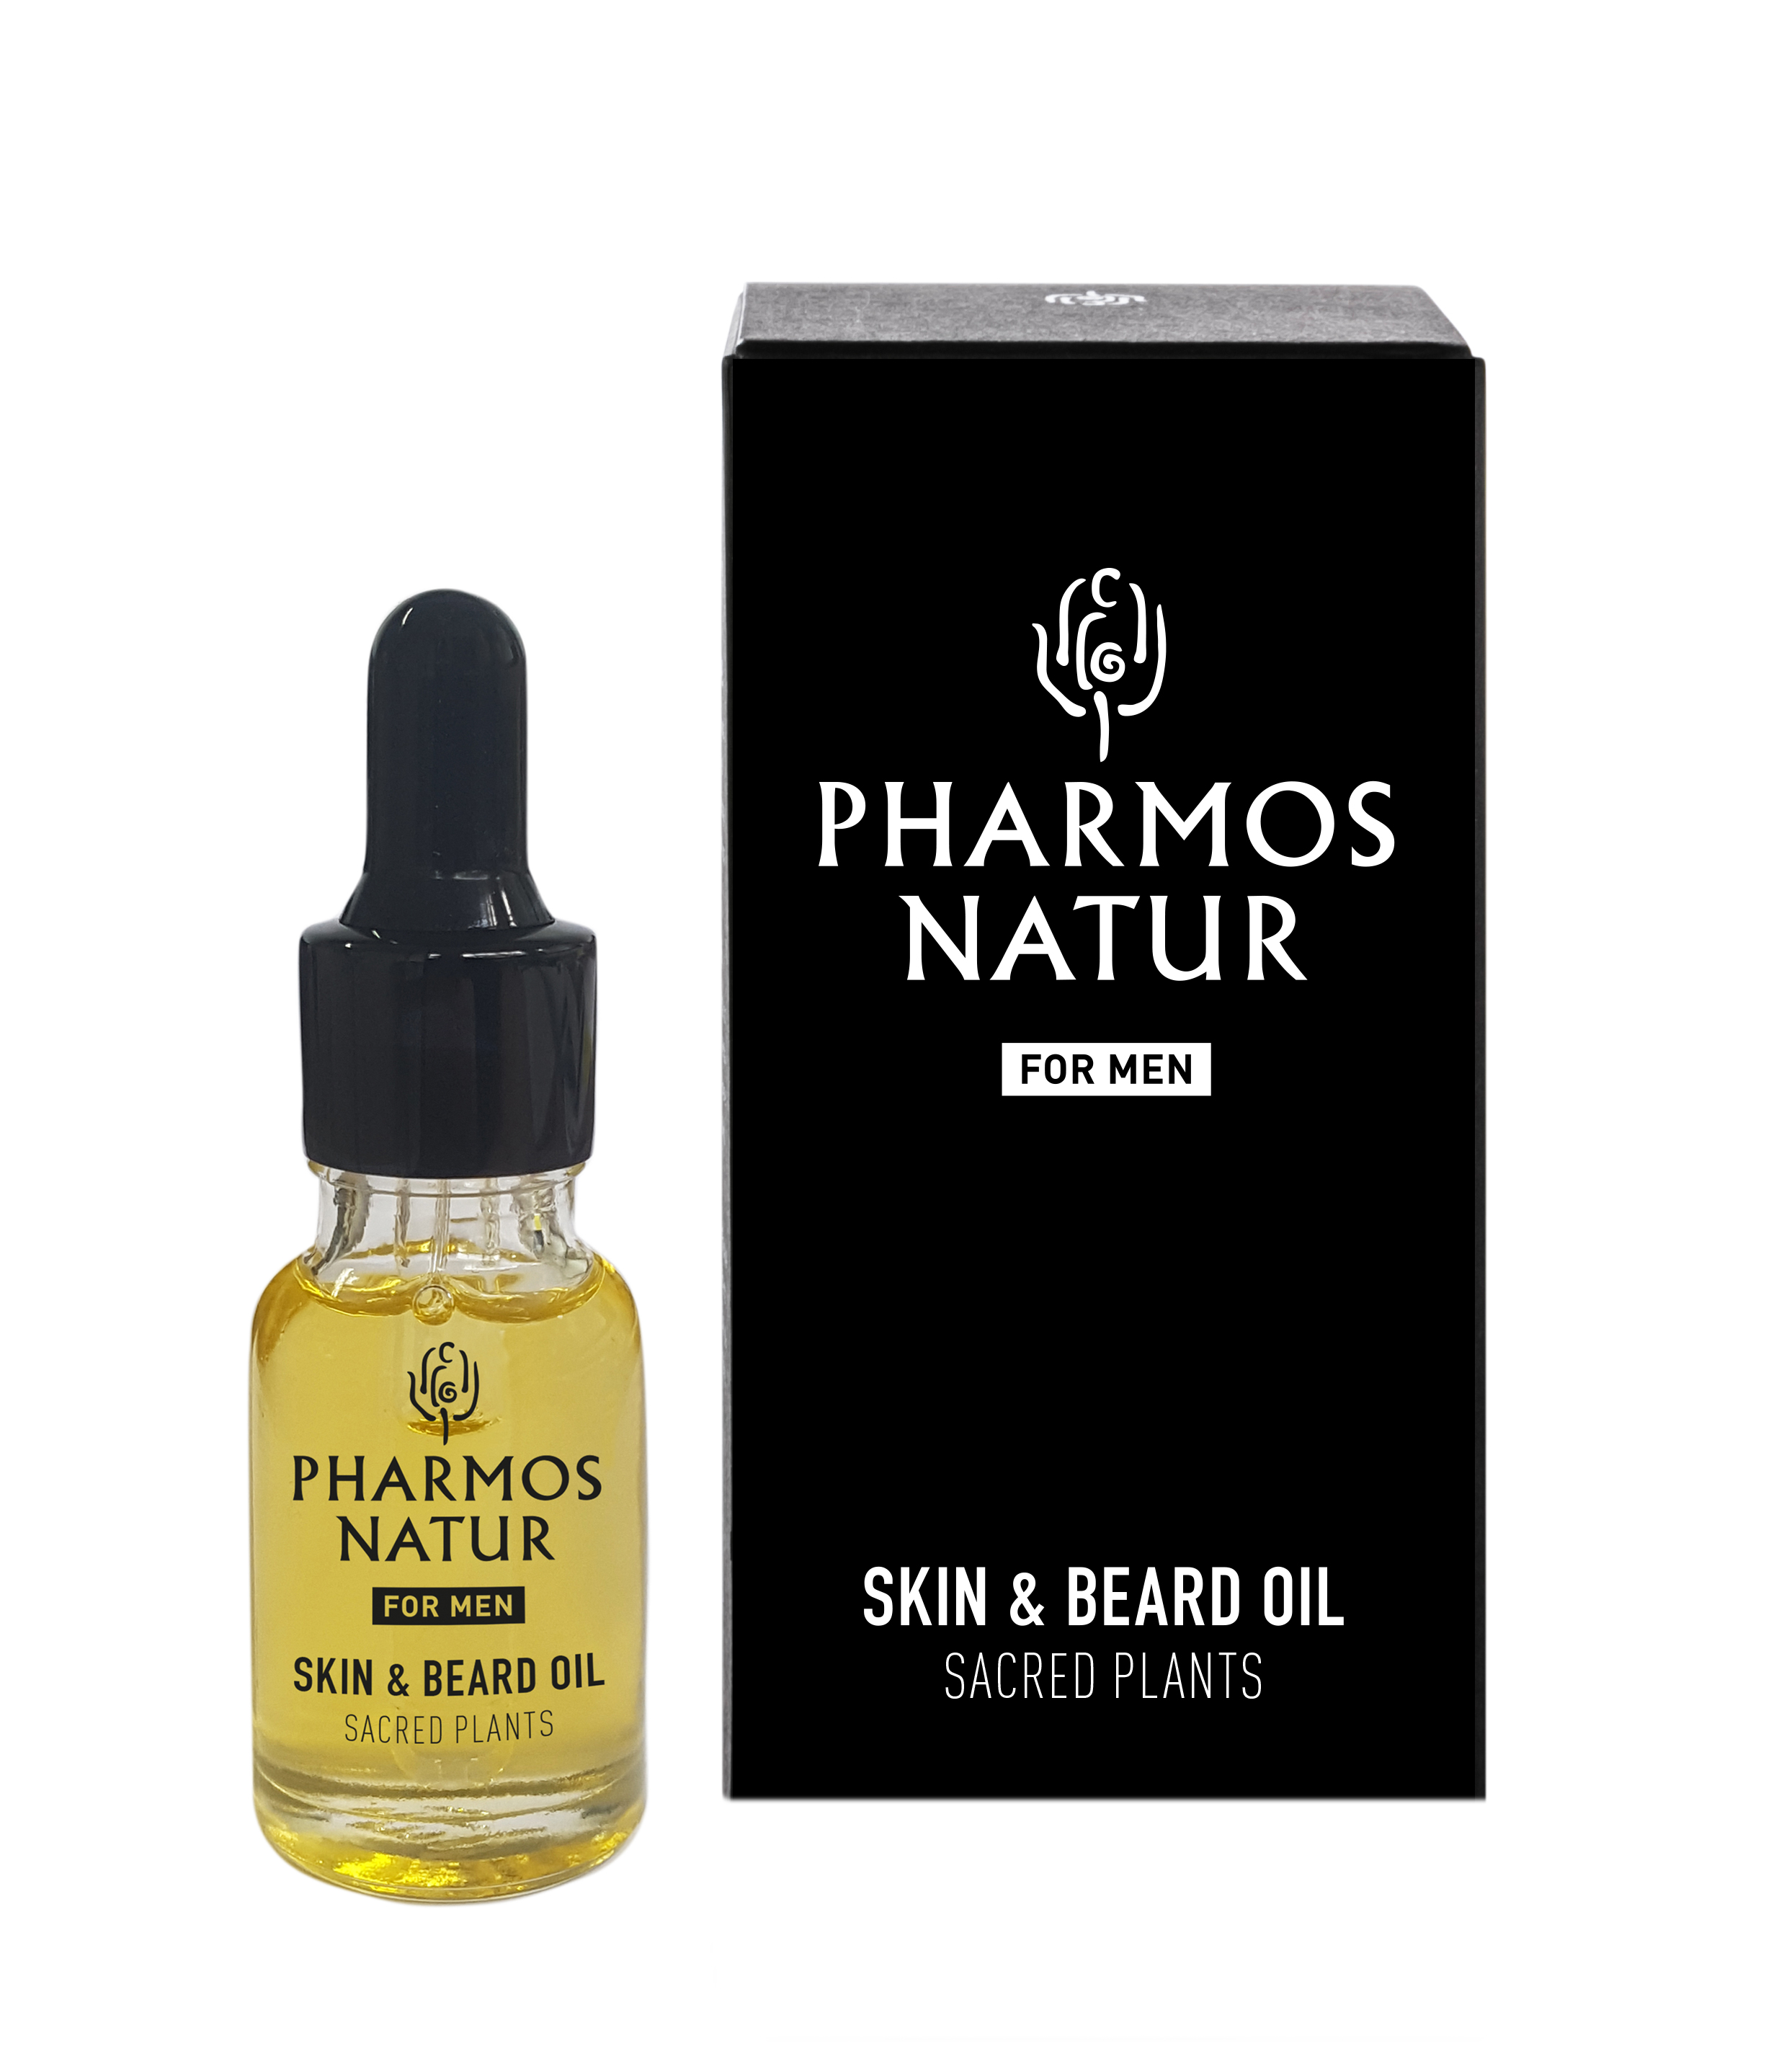 22. Pharmos Natur Skin & Beard Oil: Exclusive oil from the black sesame. Nourishes, smoothes and regenerates the skin and beard. 